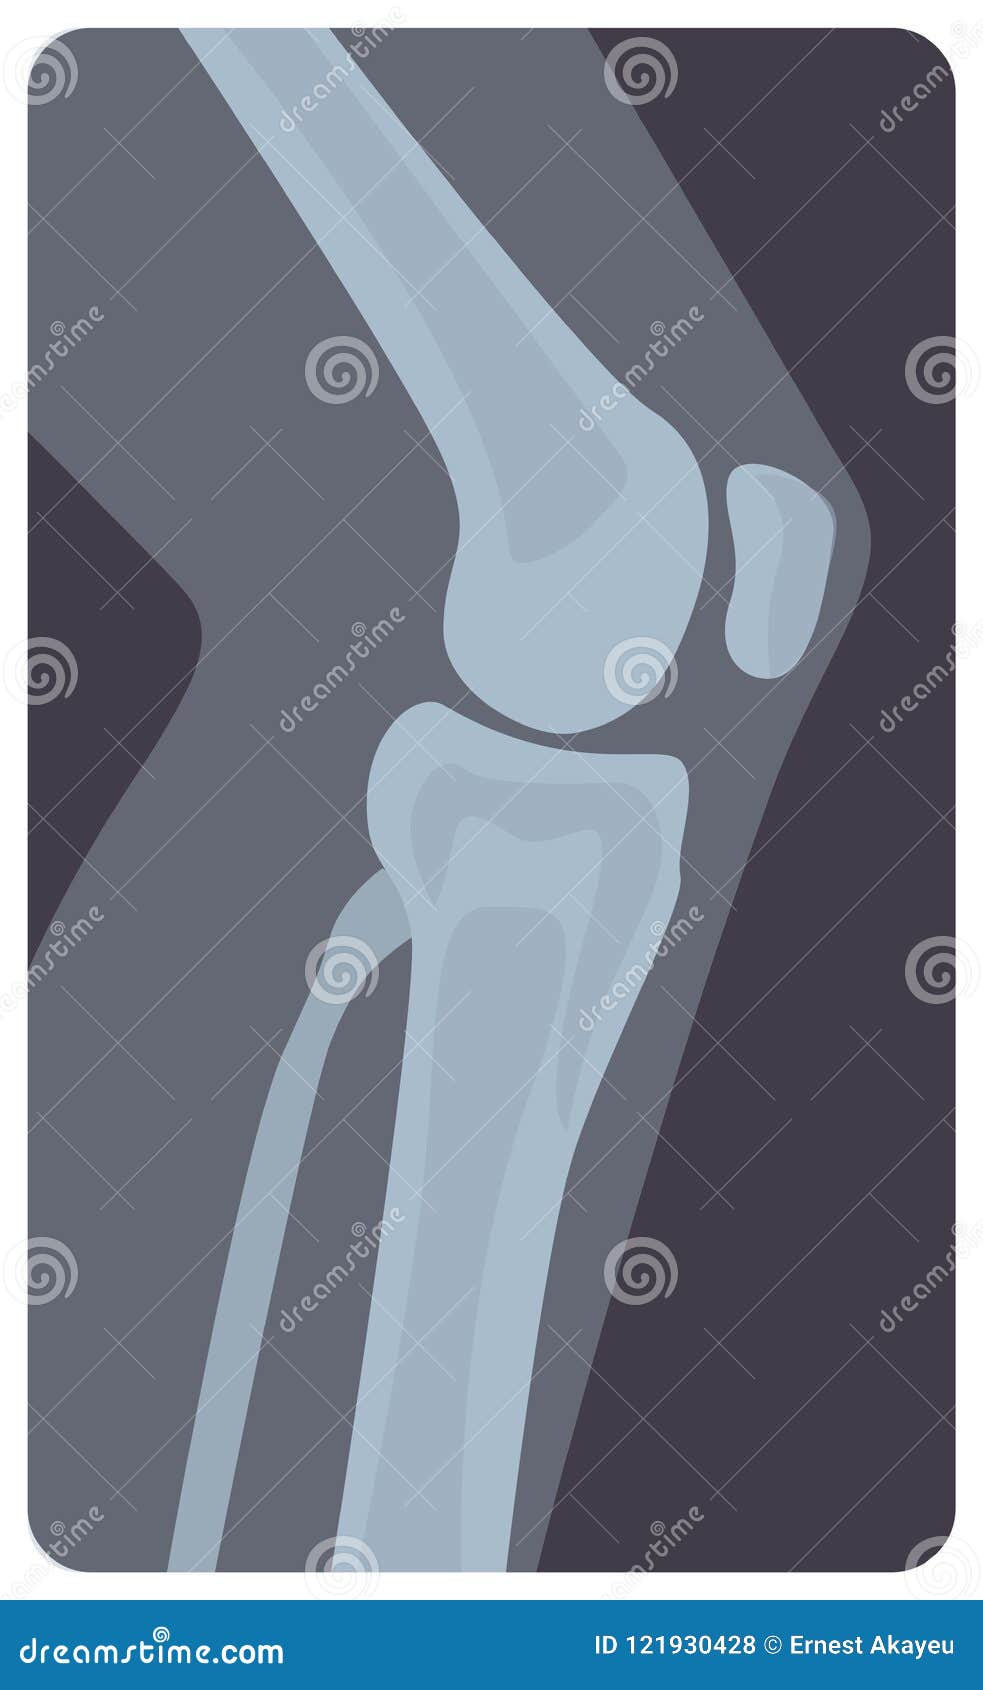 lateral radiograph of human knee joint. monochrome x-ray picture or radiographic monitor image of leg part, side view